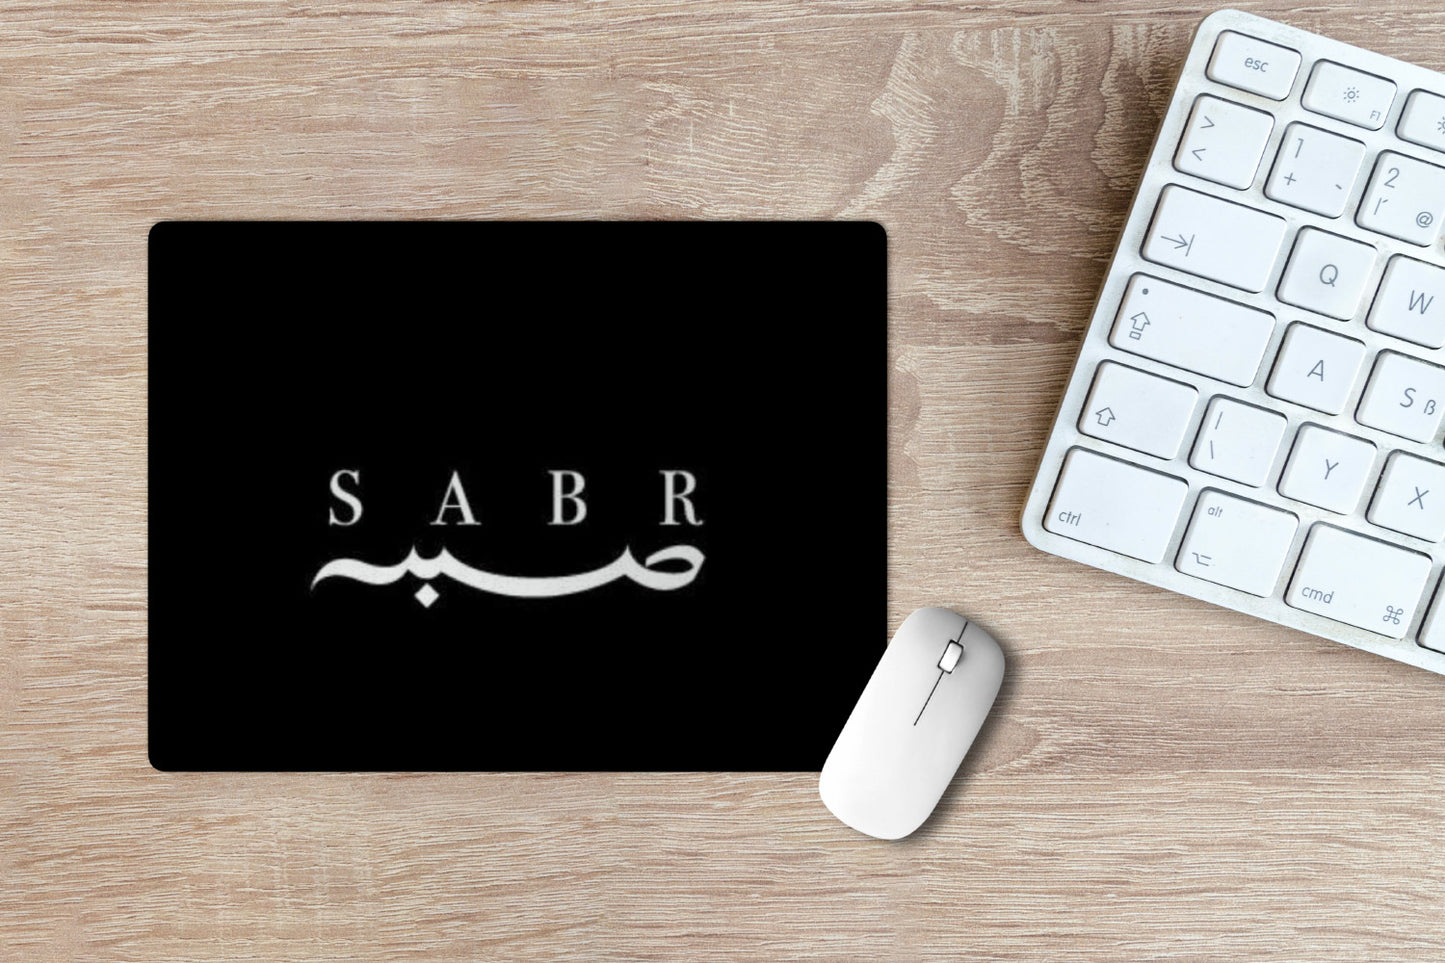 Sabr' Printed Non-Slip Rubber Base Mouse Pad for Laptop, PC, Computer